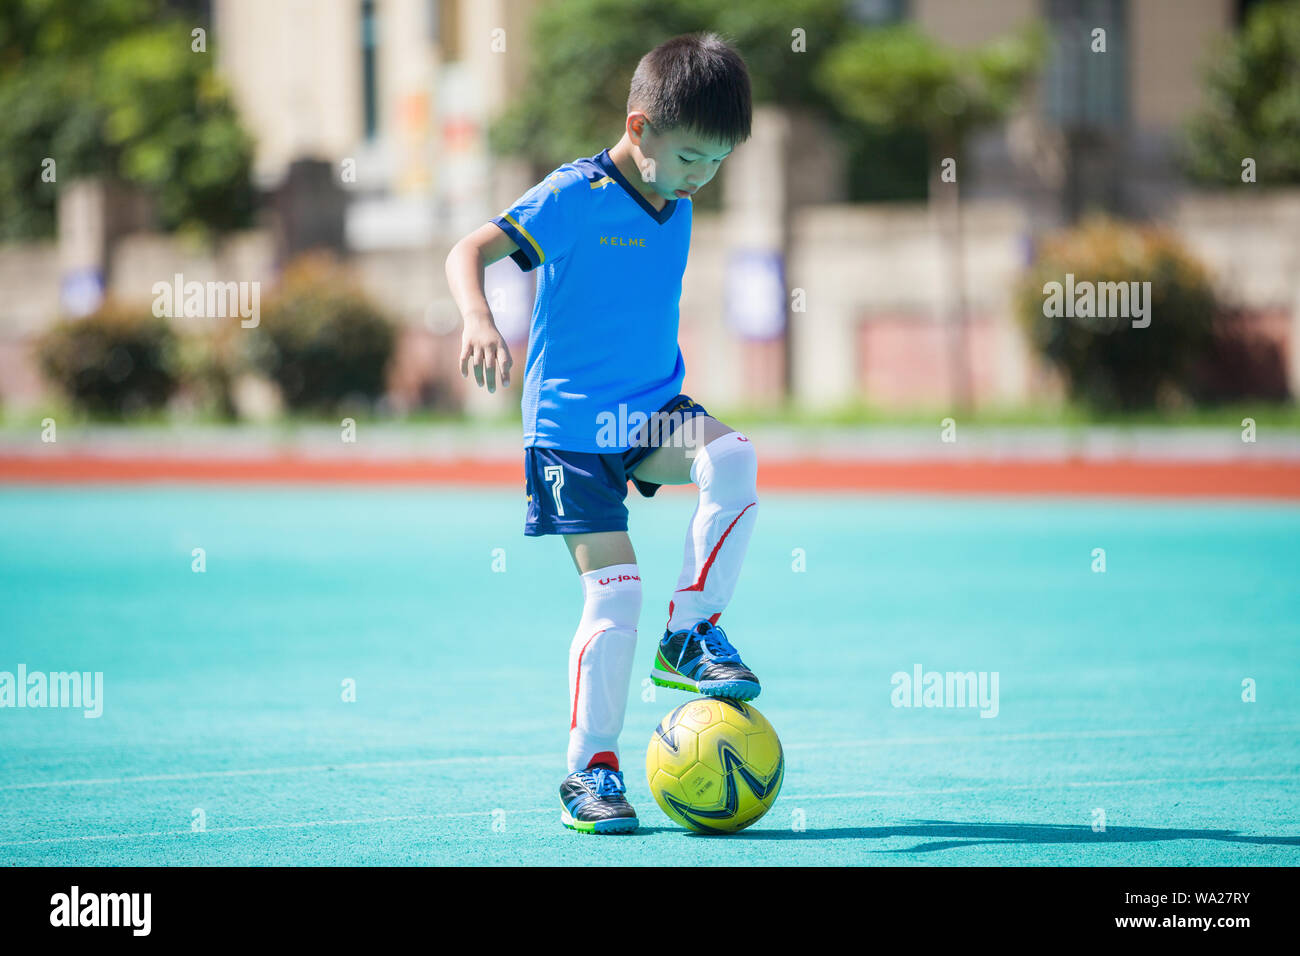 The boy playing football Stock Photo